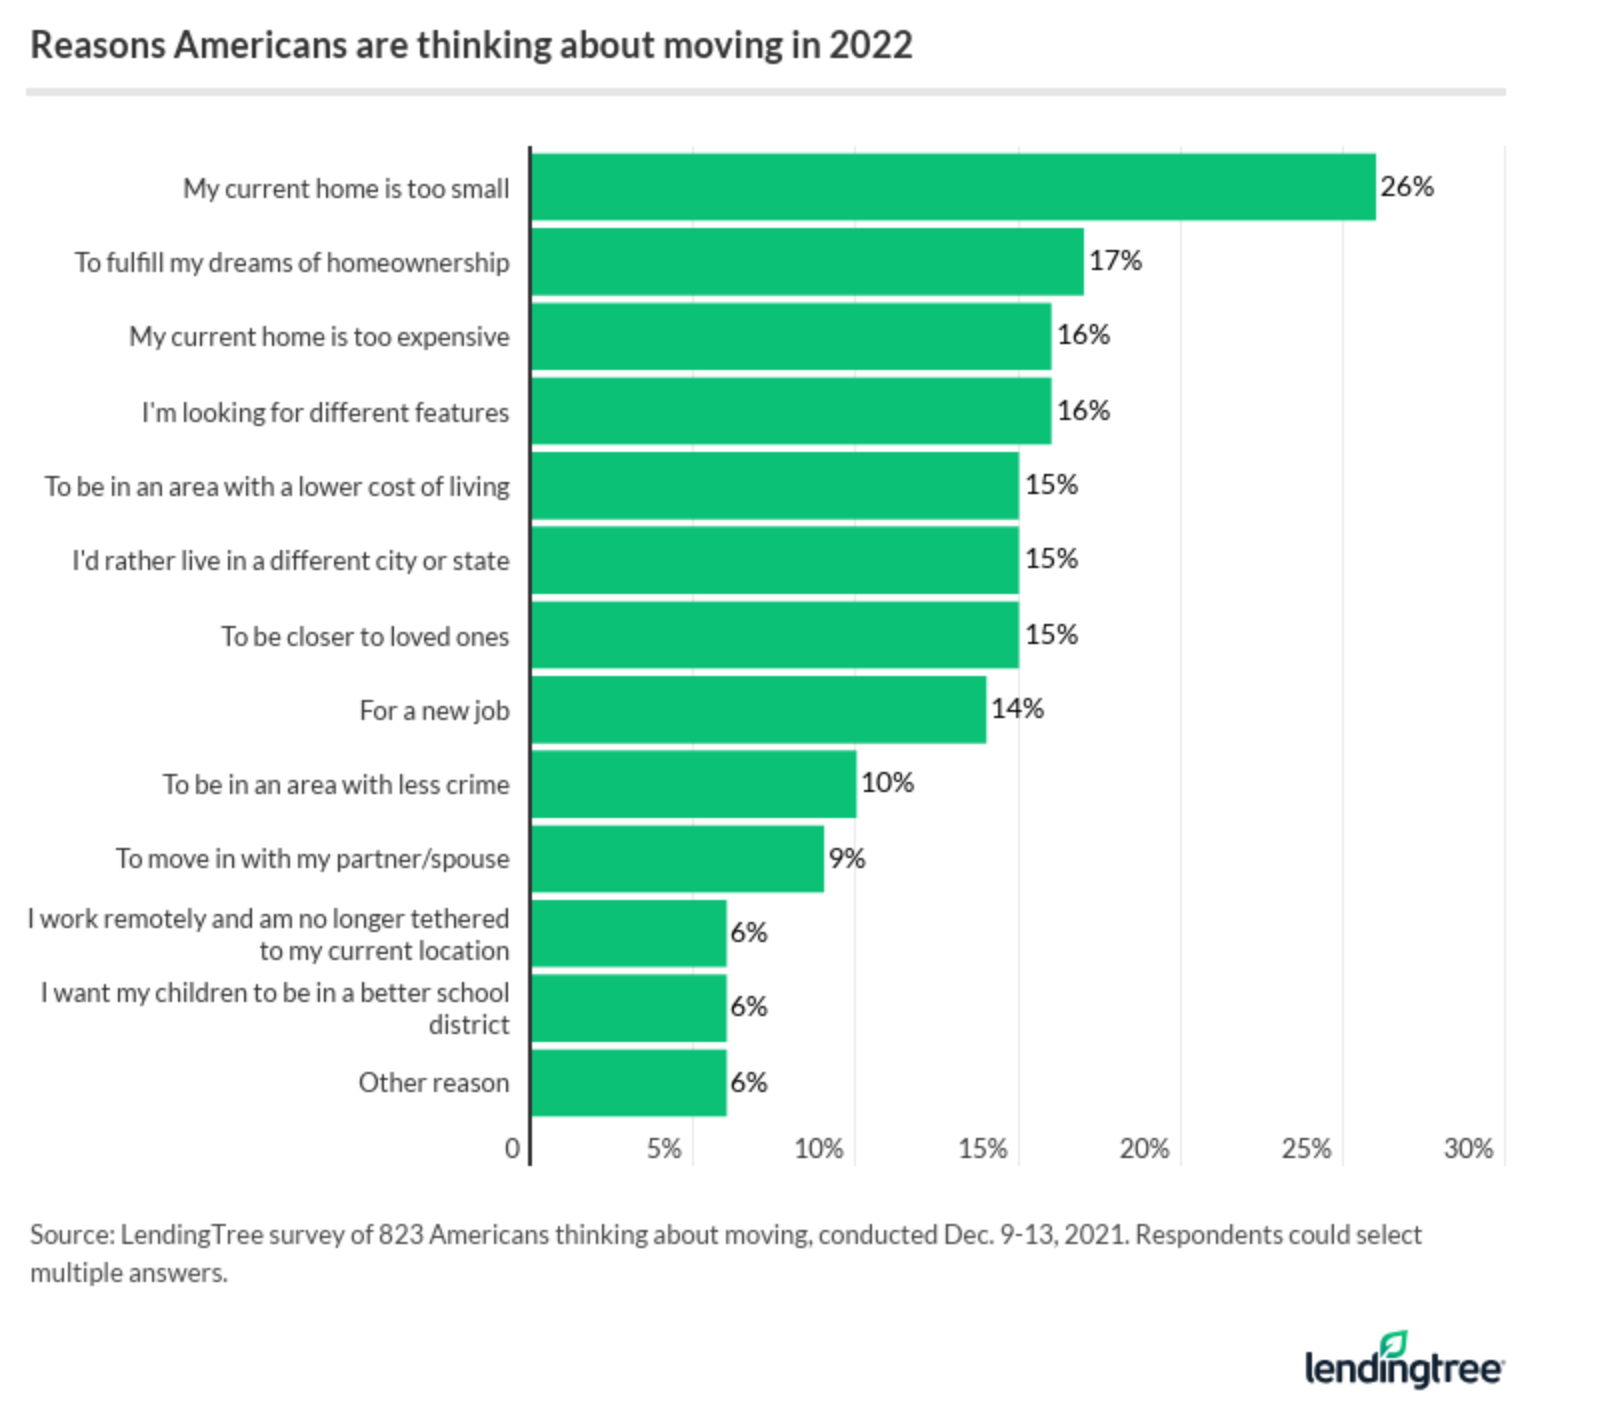 A bar chart showing the reasons Americans are planning to move